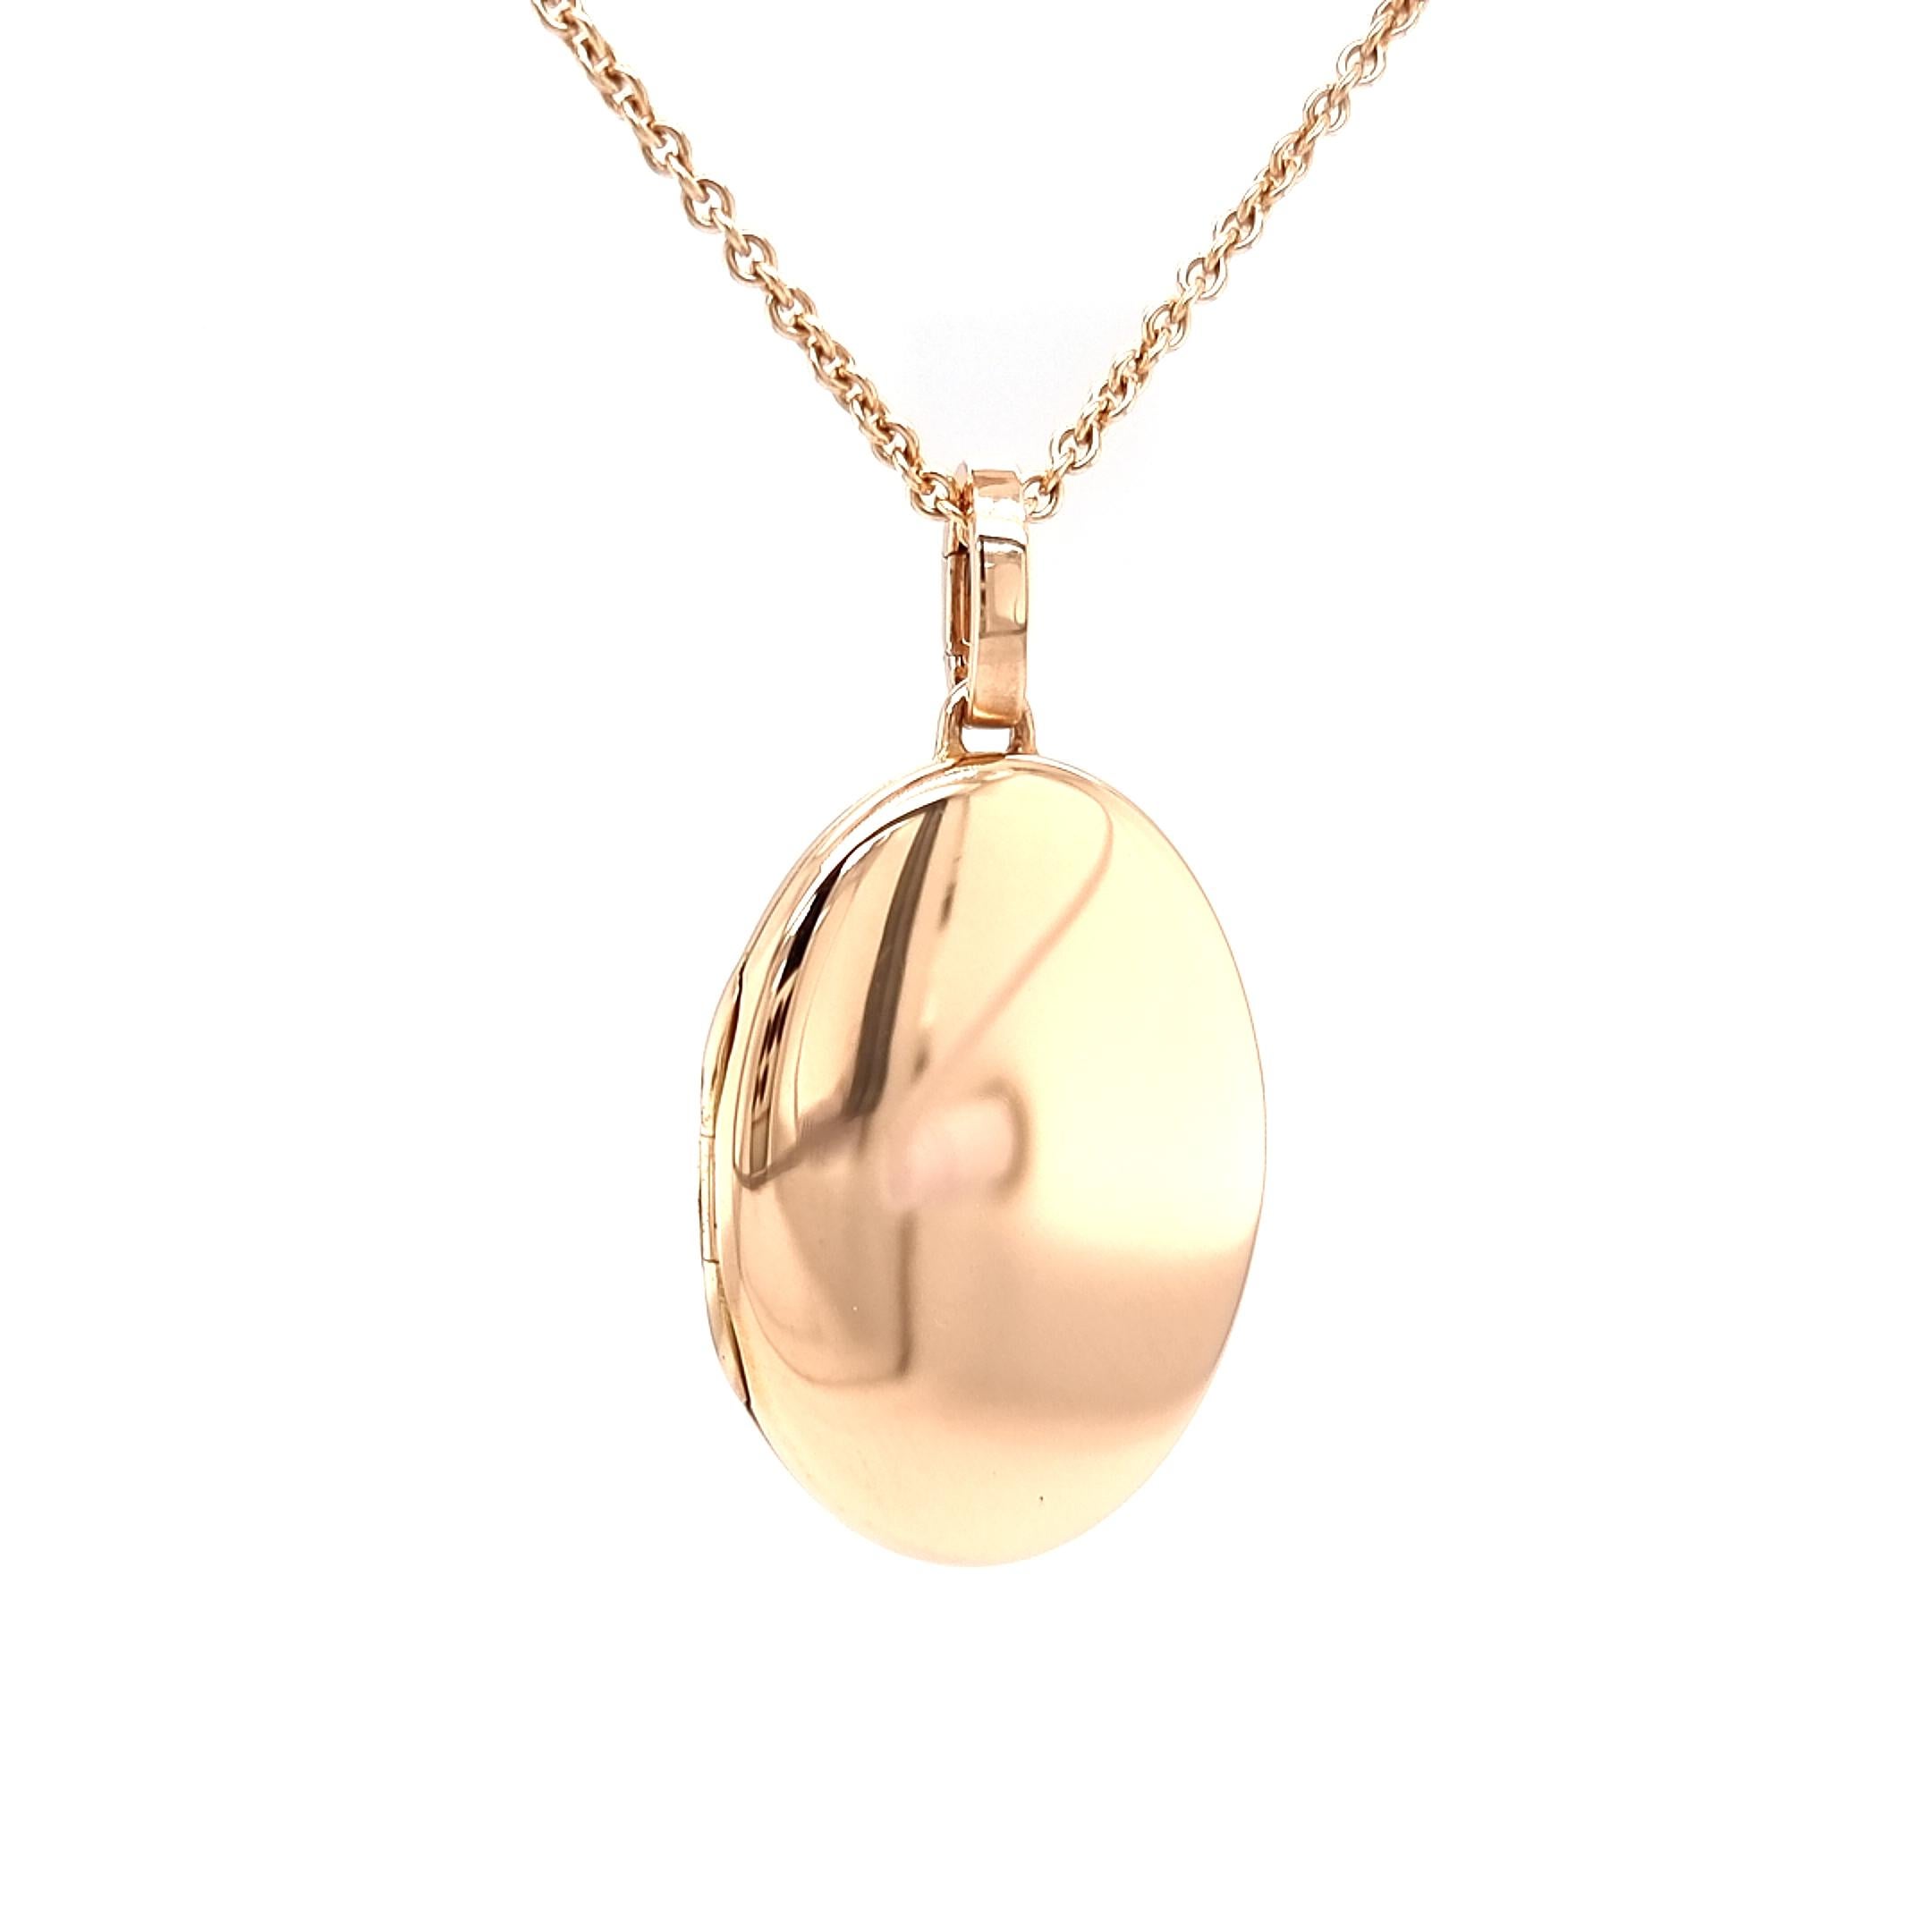 Customizable Oval Polished Pendant Locket - 18k Rose Gold - 23.0 mm x 32.0 mm In New Condition For Sale In Pforzheim, DE